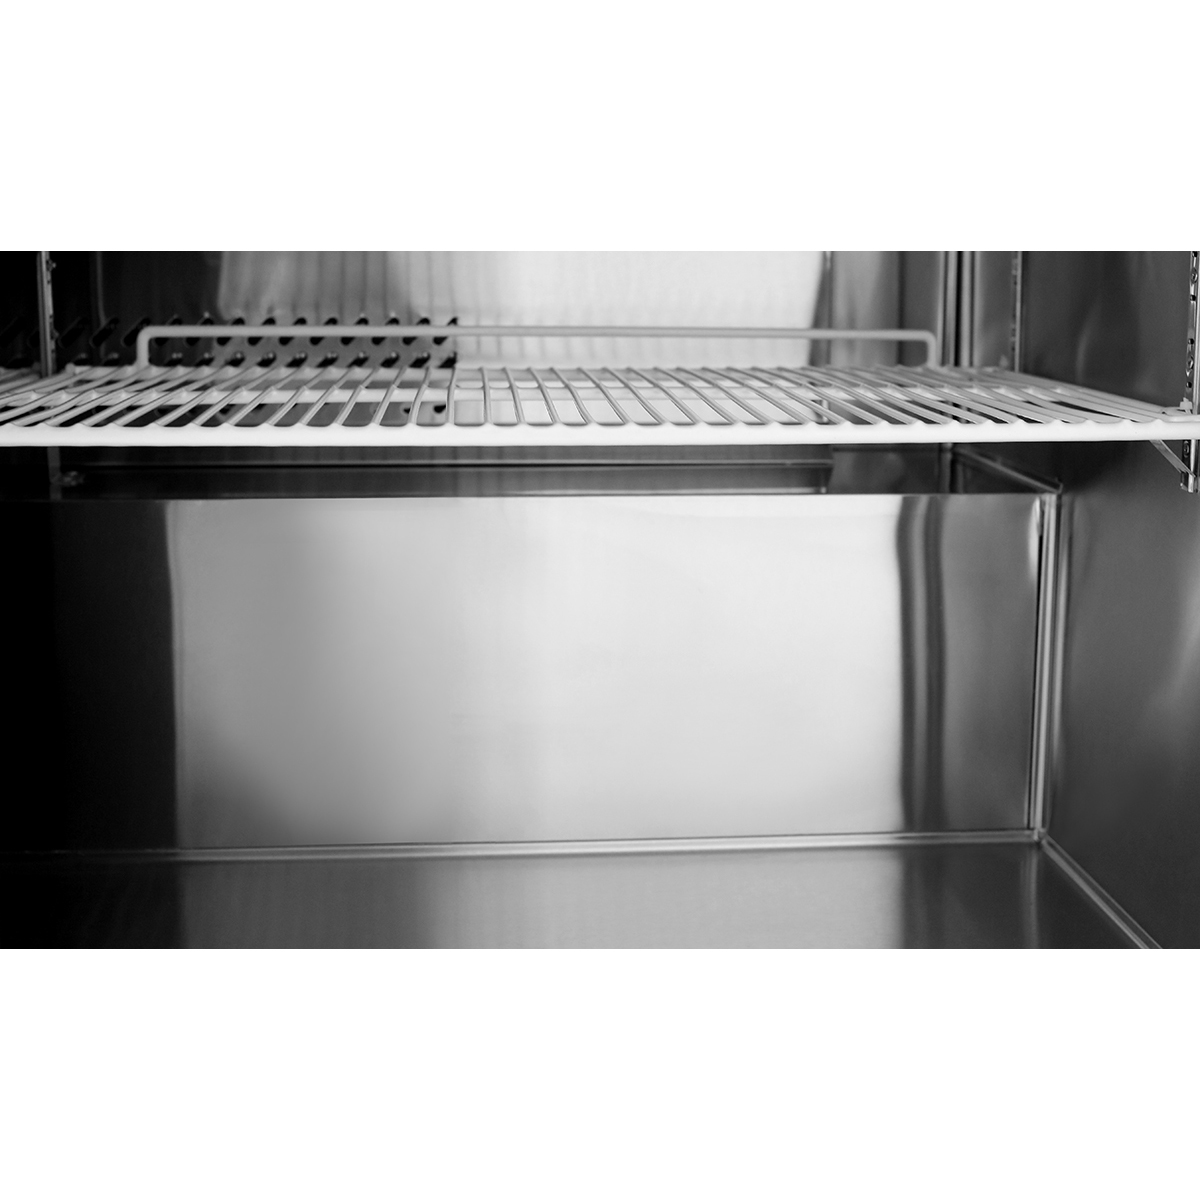 Atosa MGF8409GR Worktop Refrigerator, Two-Section, 48-3/10"W, 13.4 cu. ft. image 2